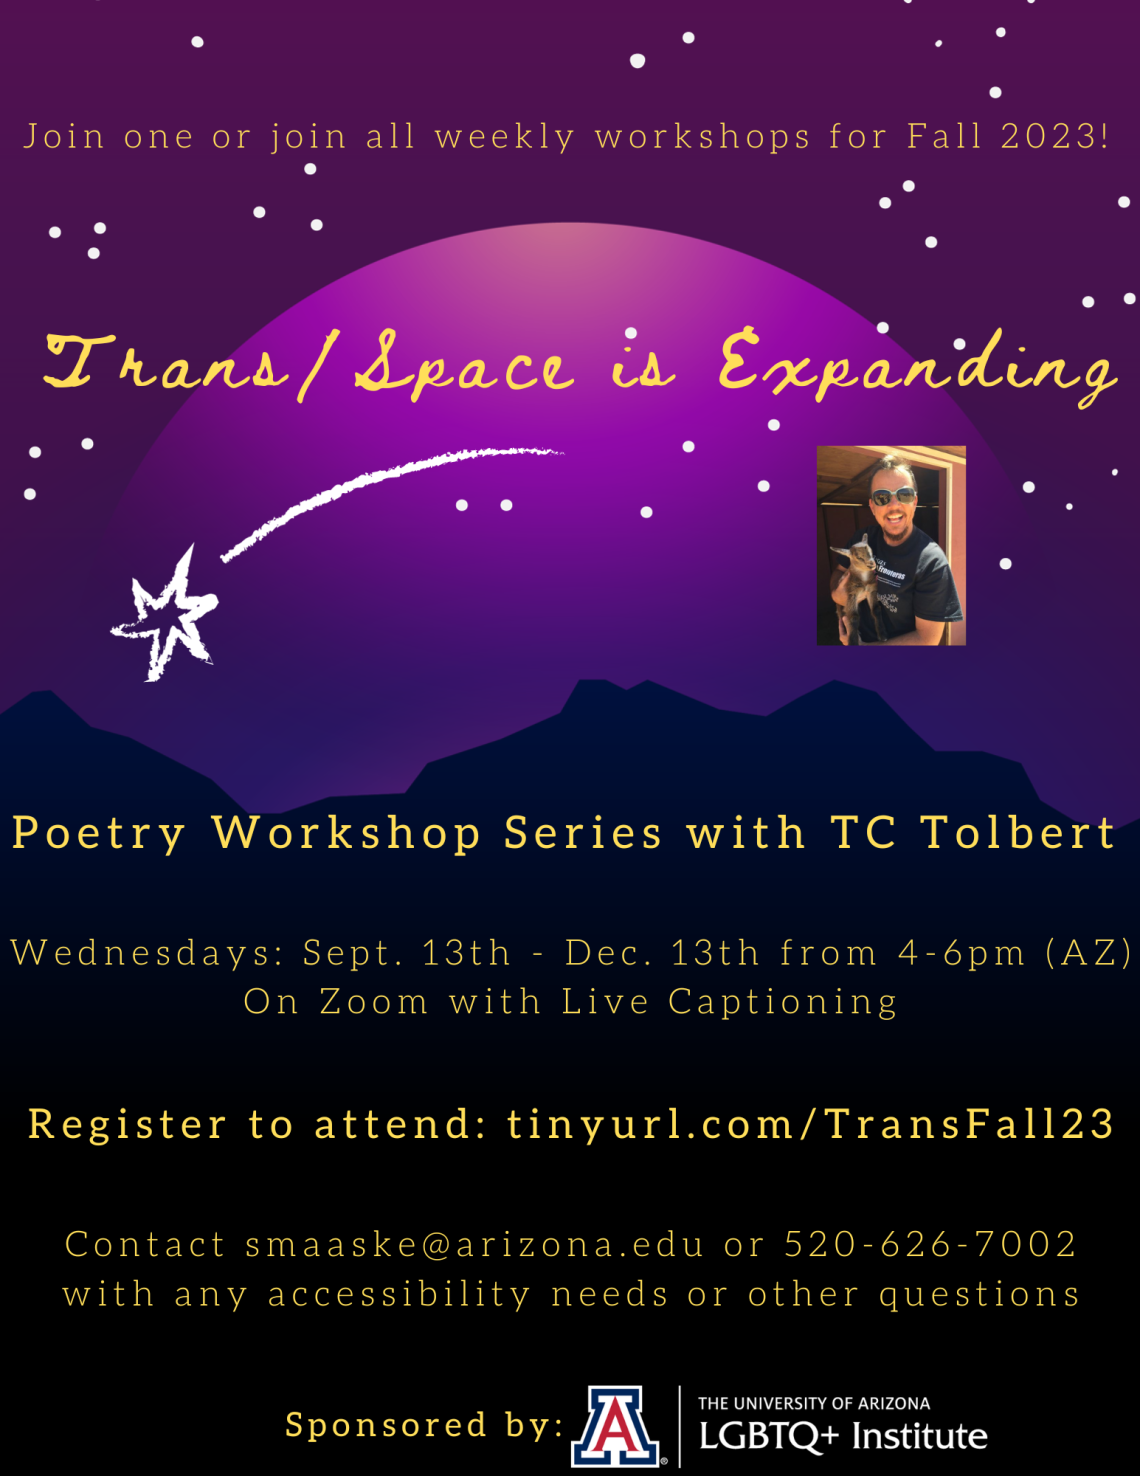 purple and black mountain and shooting star background. Yellow text reads"trans/space is expanding. Poetry workshop series with TC Tolbert. Wednesday Sept 13th-Dec. 13th from 4-6pm. Register to attend: tinyurl.com/TransFall23 . Live captioning.